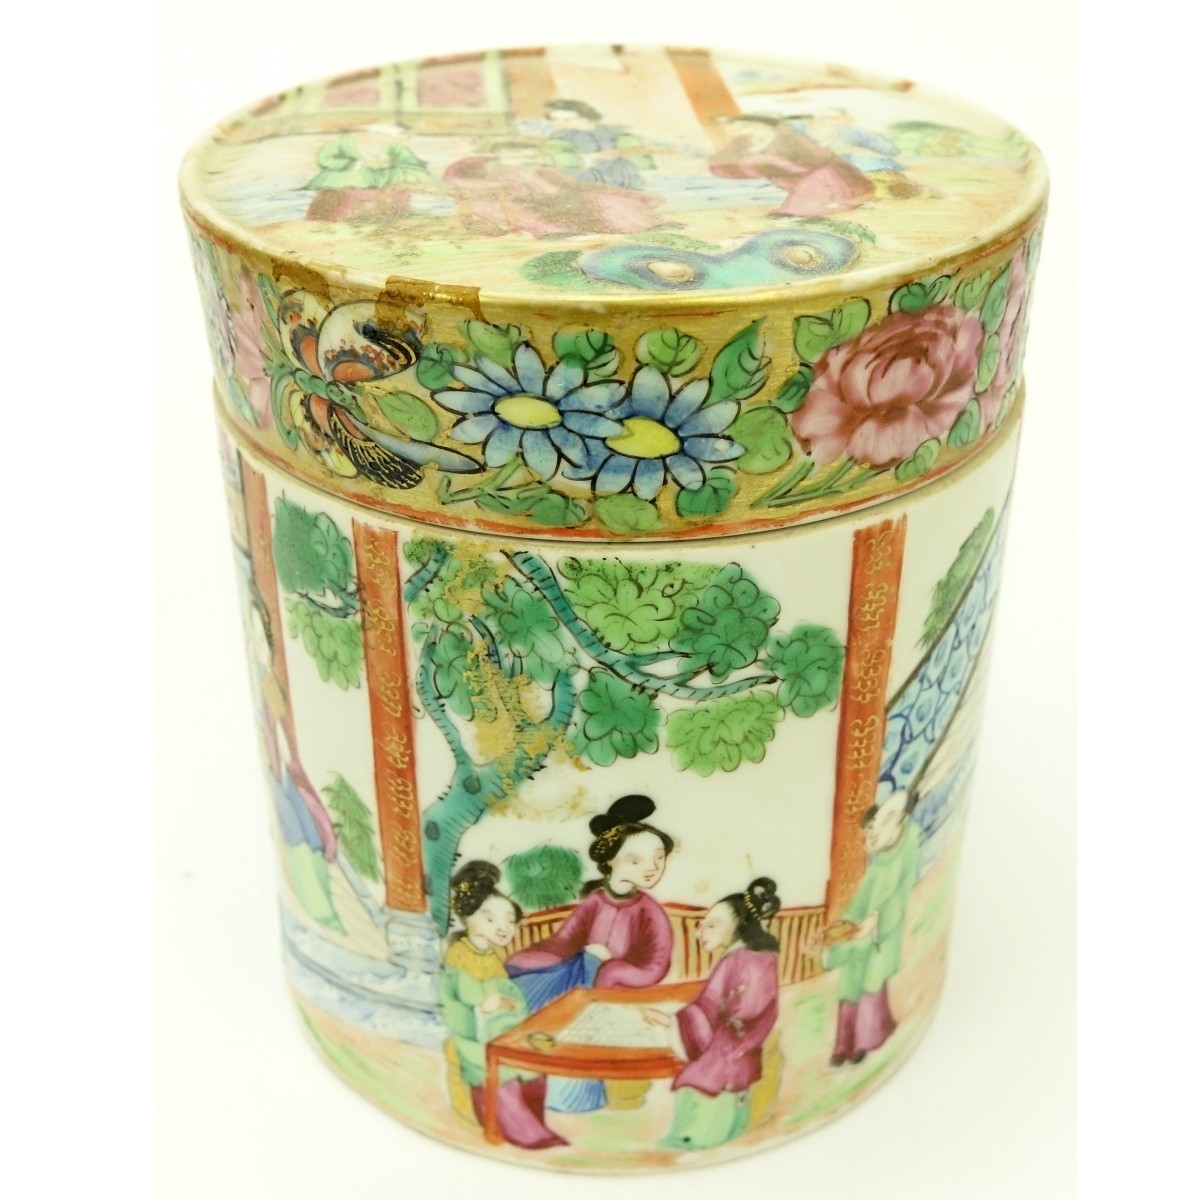 Chinese Export Porcelain Covered Jar